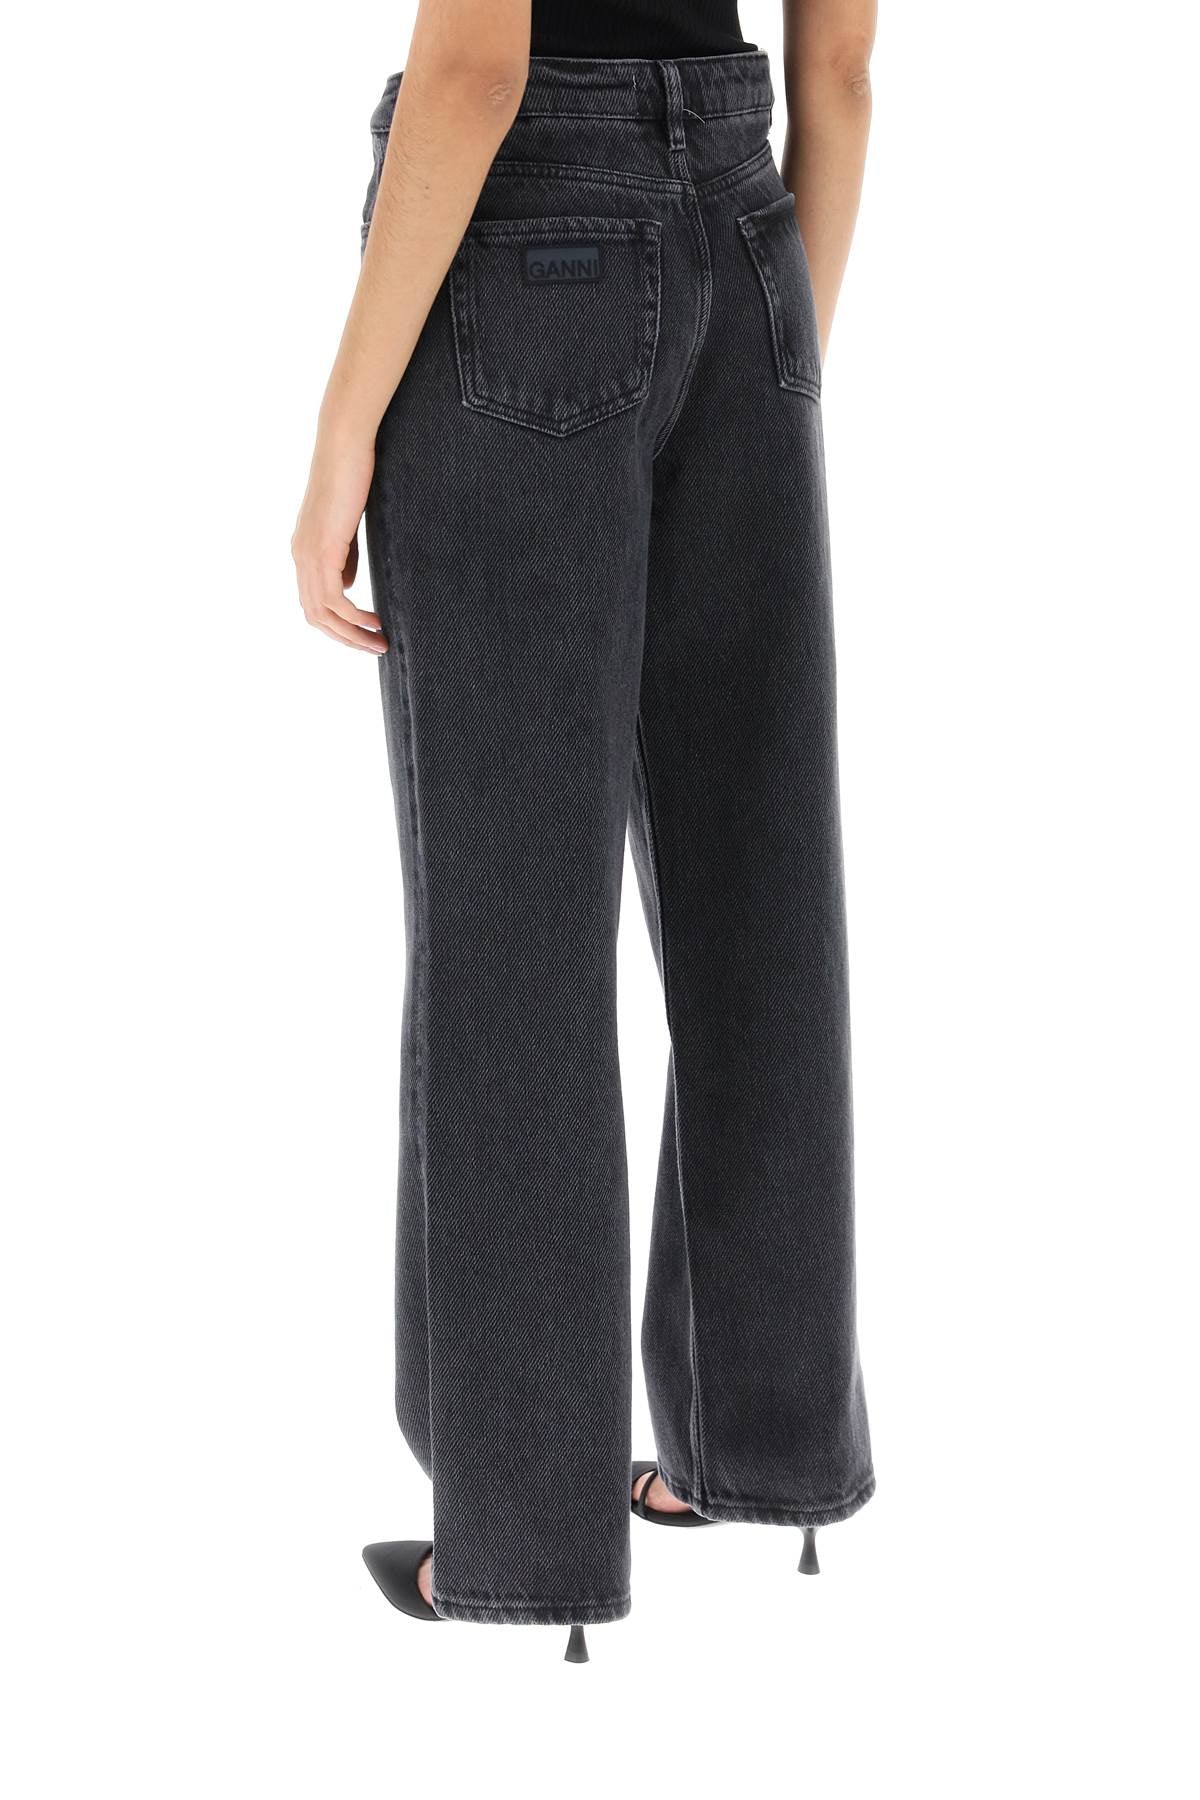 Ganni loose jeans with drawstring-2